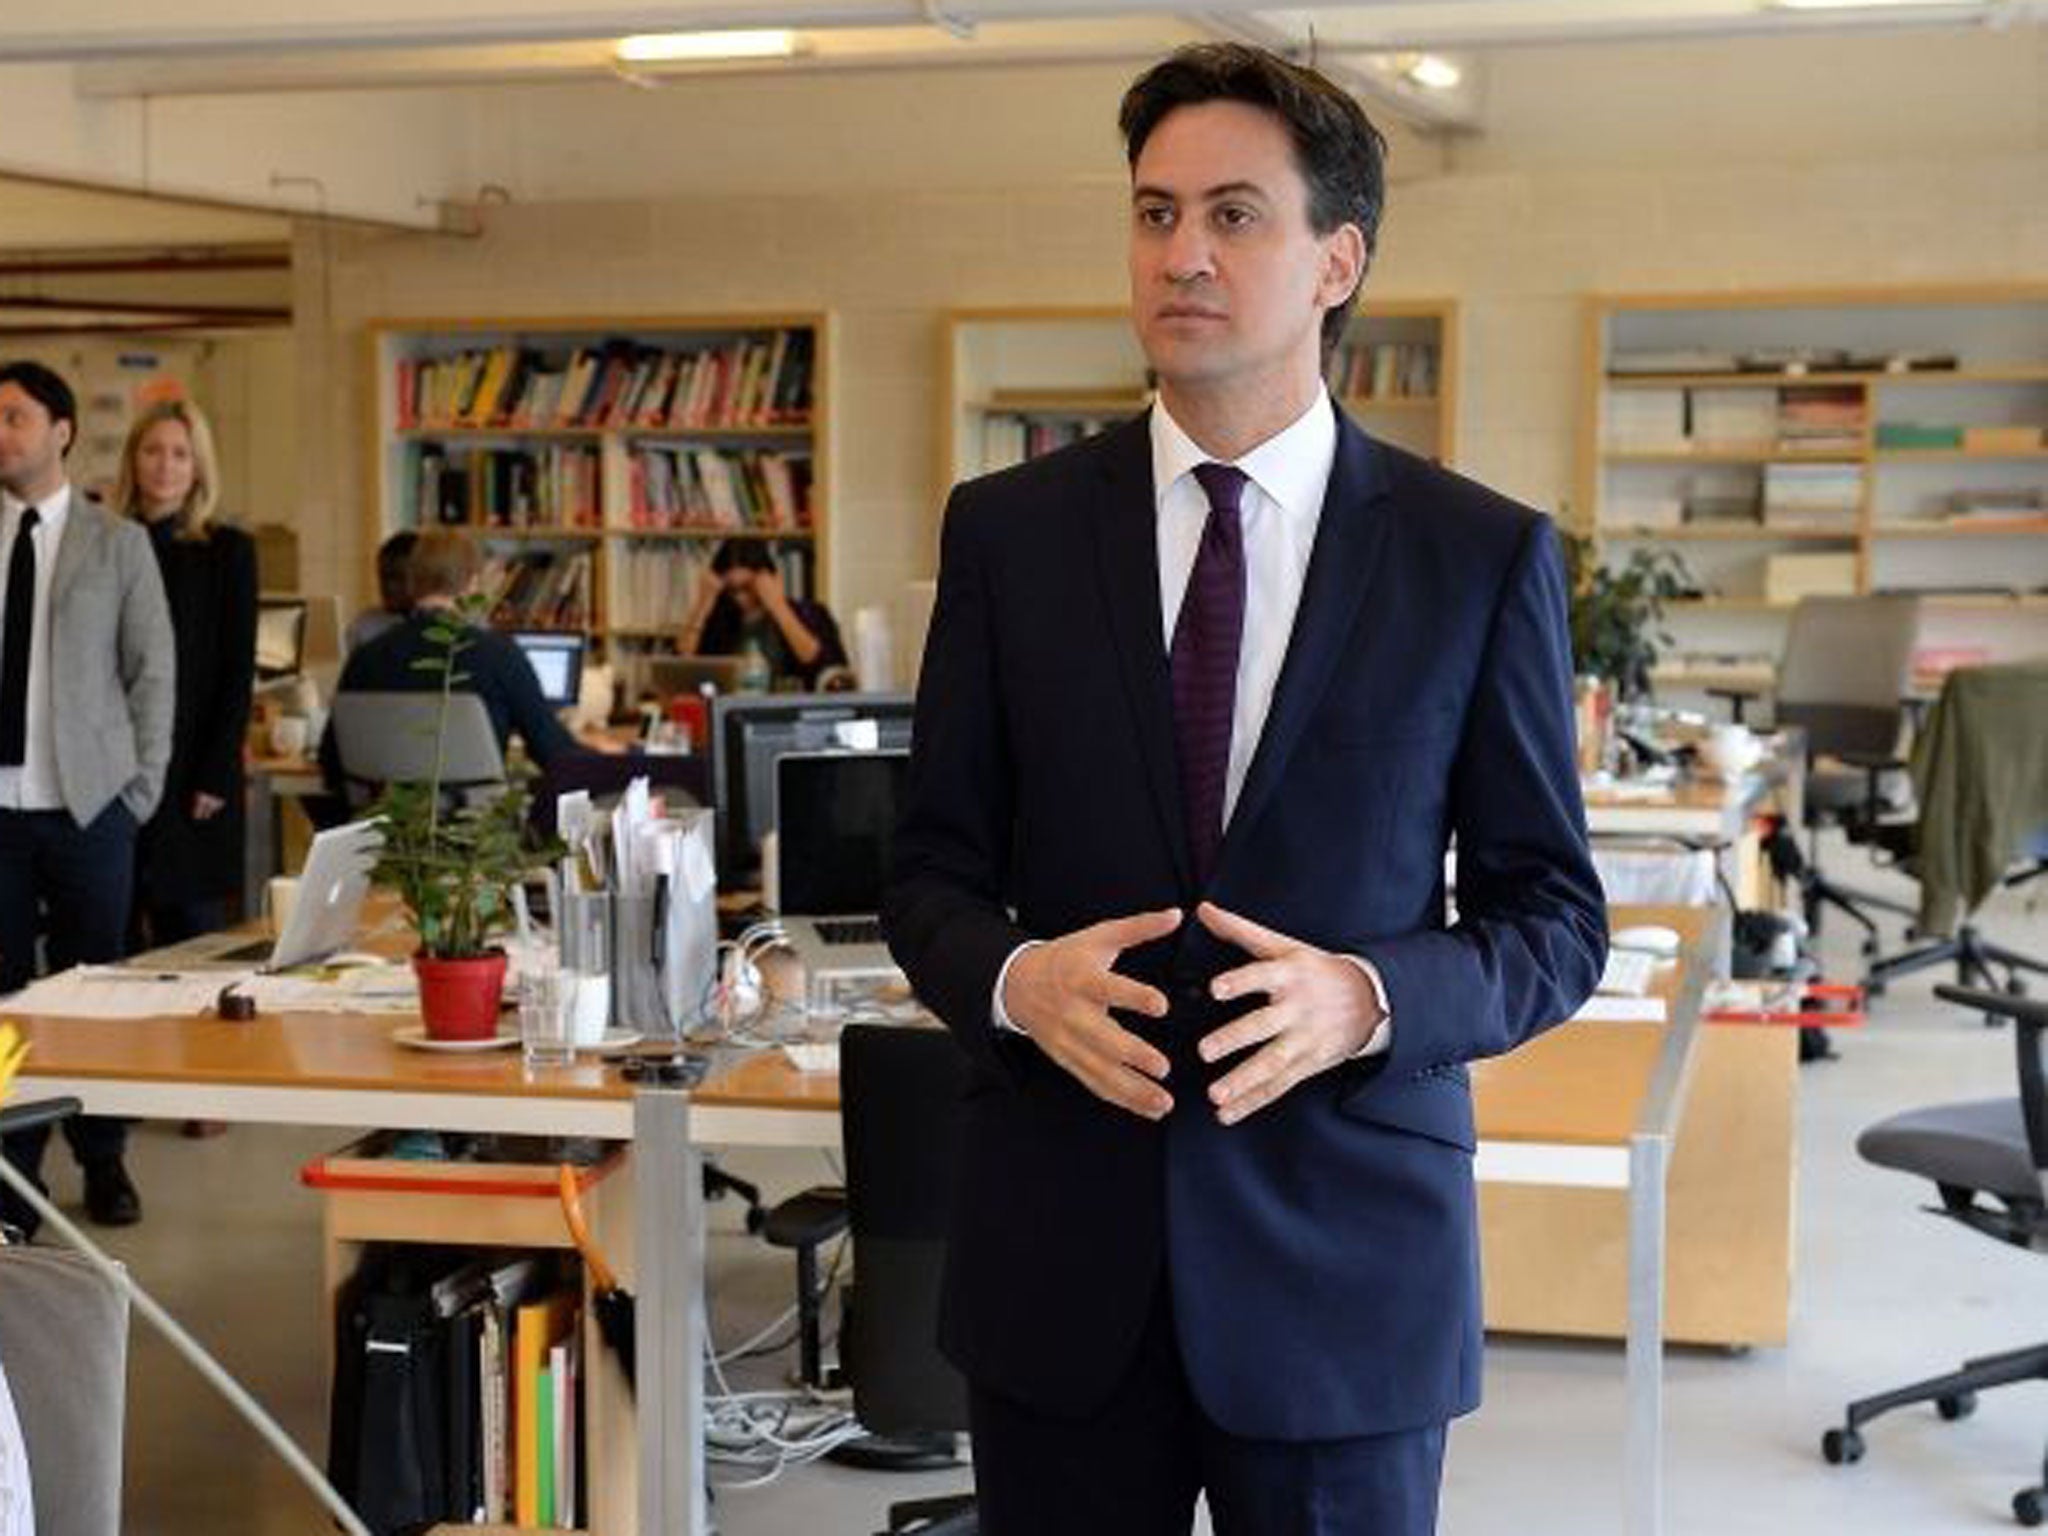 According to the Independent's poll Labour has increased it's lead, but voters still cannot imagine Ed Miliband as Prime Minister